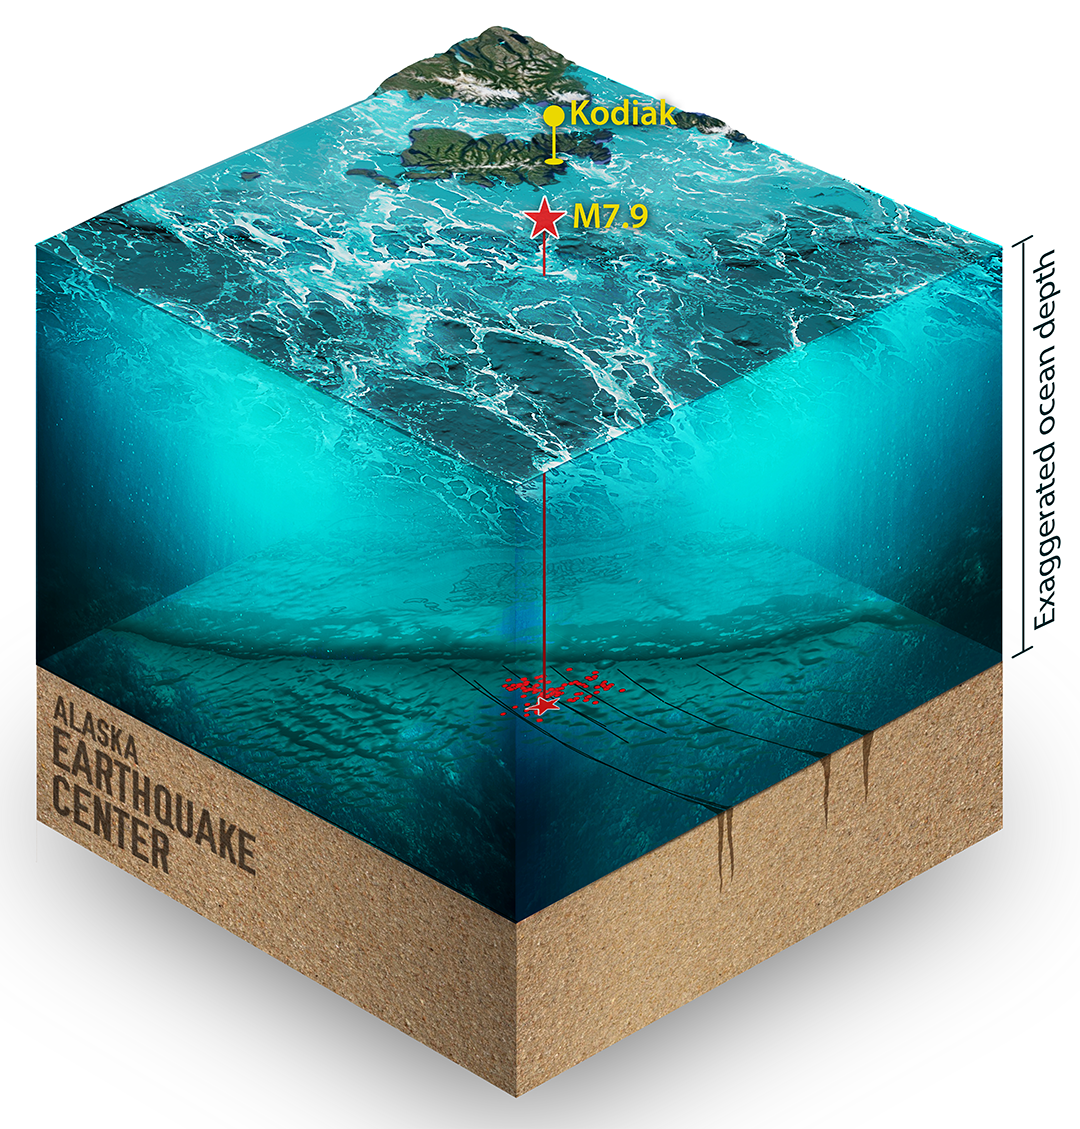 This is an artistic rendering of the seafloor where the Offshore Kodiak M7.9 occurred.